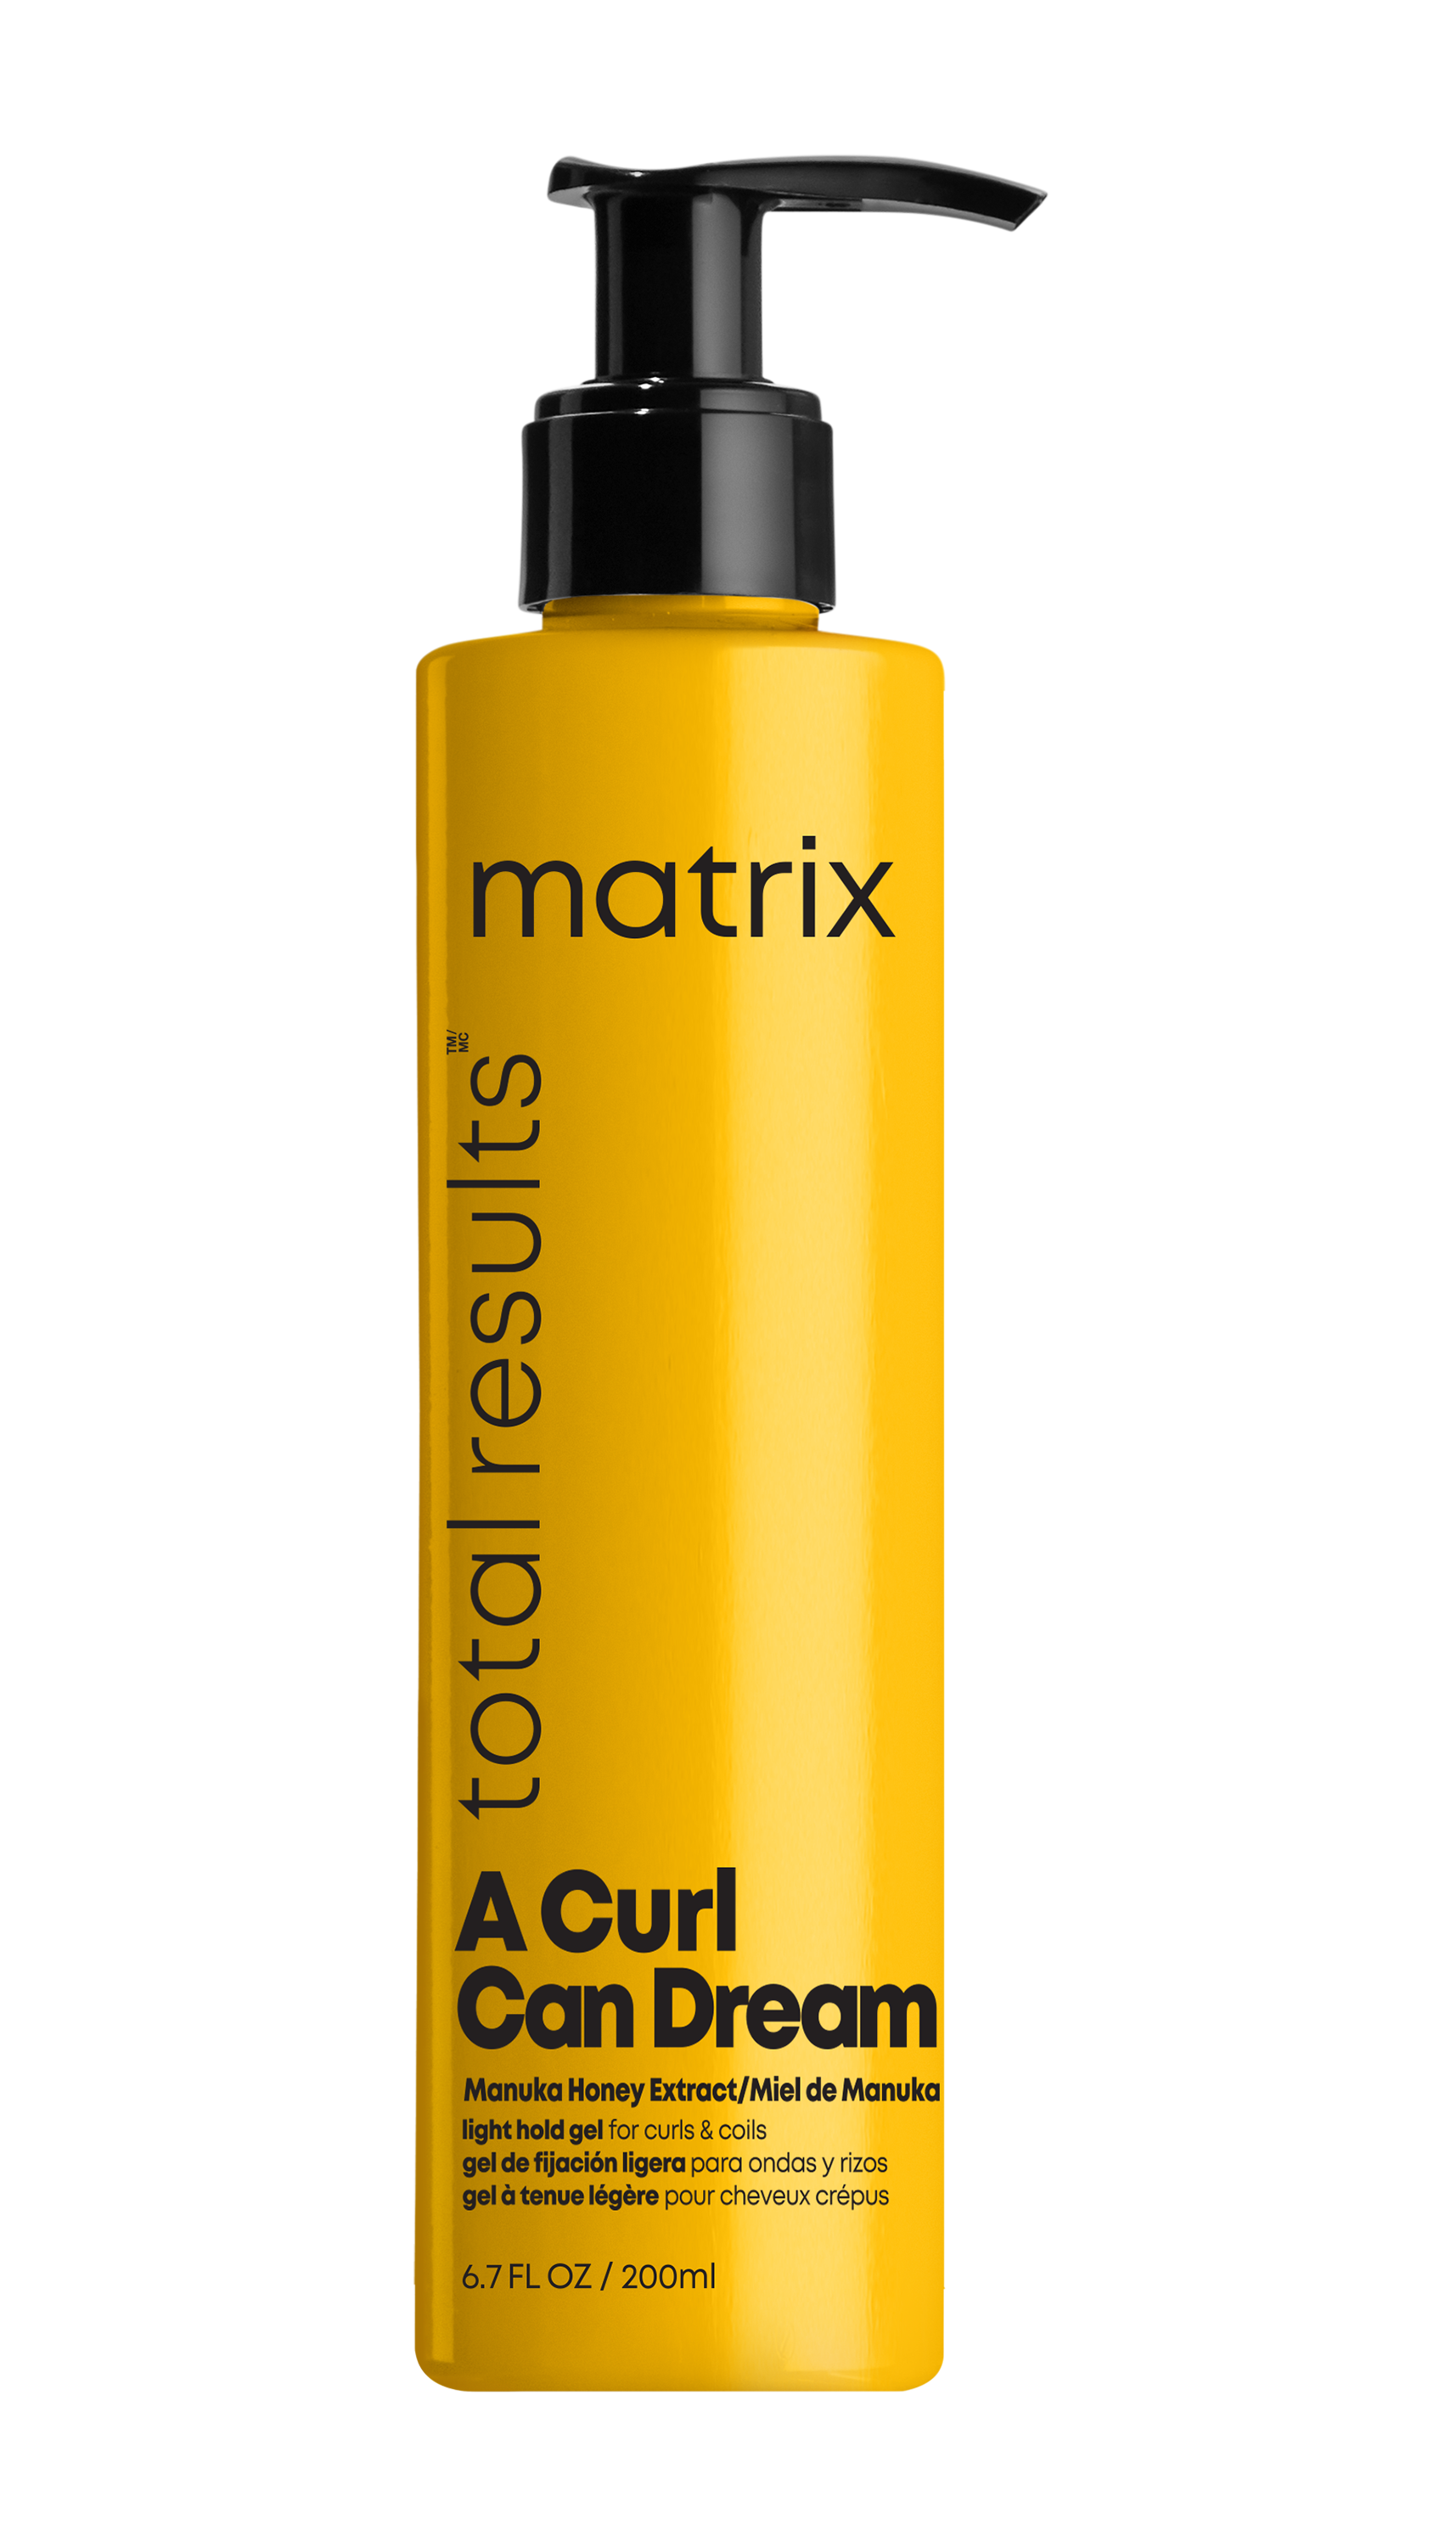 A Curl Can Dream Manuka Honey Extract Light Hold Gel for curls & coils 19,55* € - 200ml